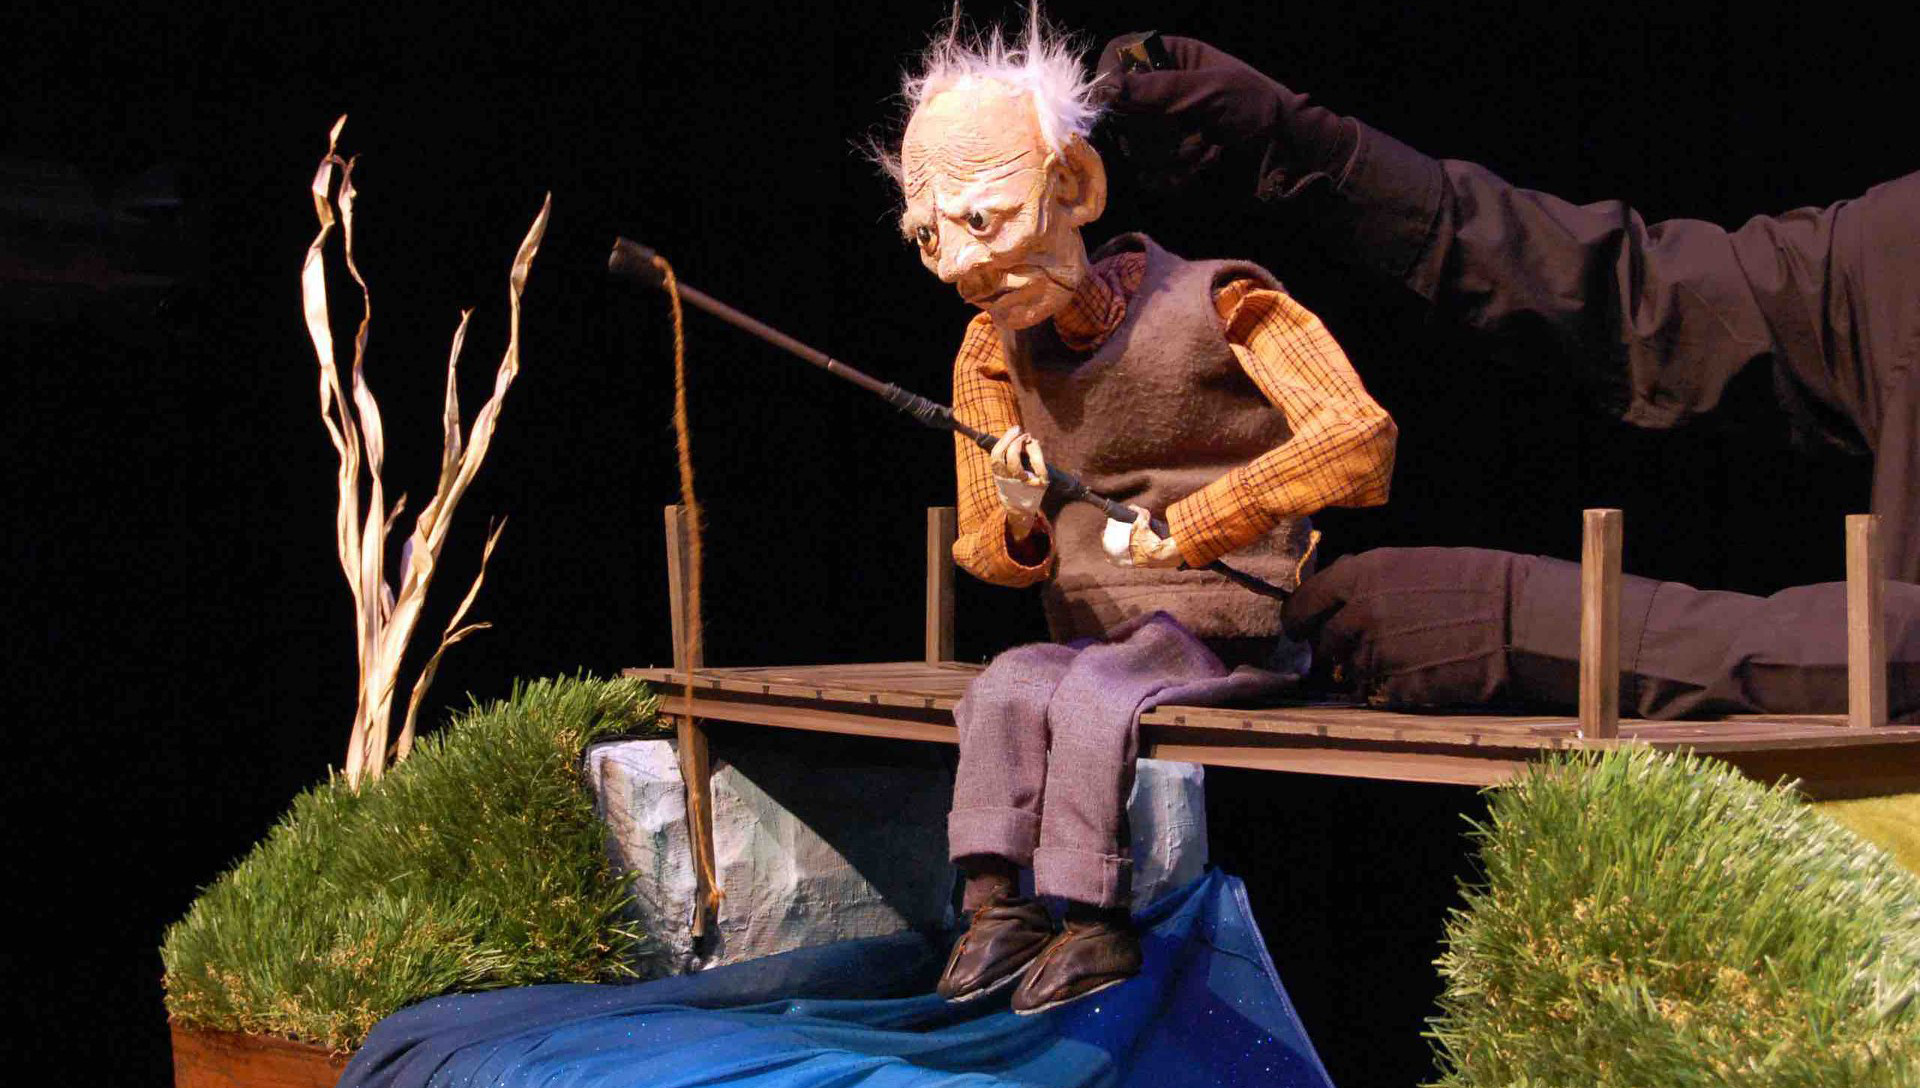 Production shot from the show Old Man and the River. A puppet about 18 inches high of an old man with sparse white hair sits fishing while sitting on a bridge. A river made of blue fabric runs under the bridge and two arms masked with black gloves and sleeves are seen manipulating the puppet.